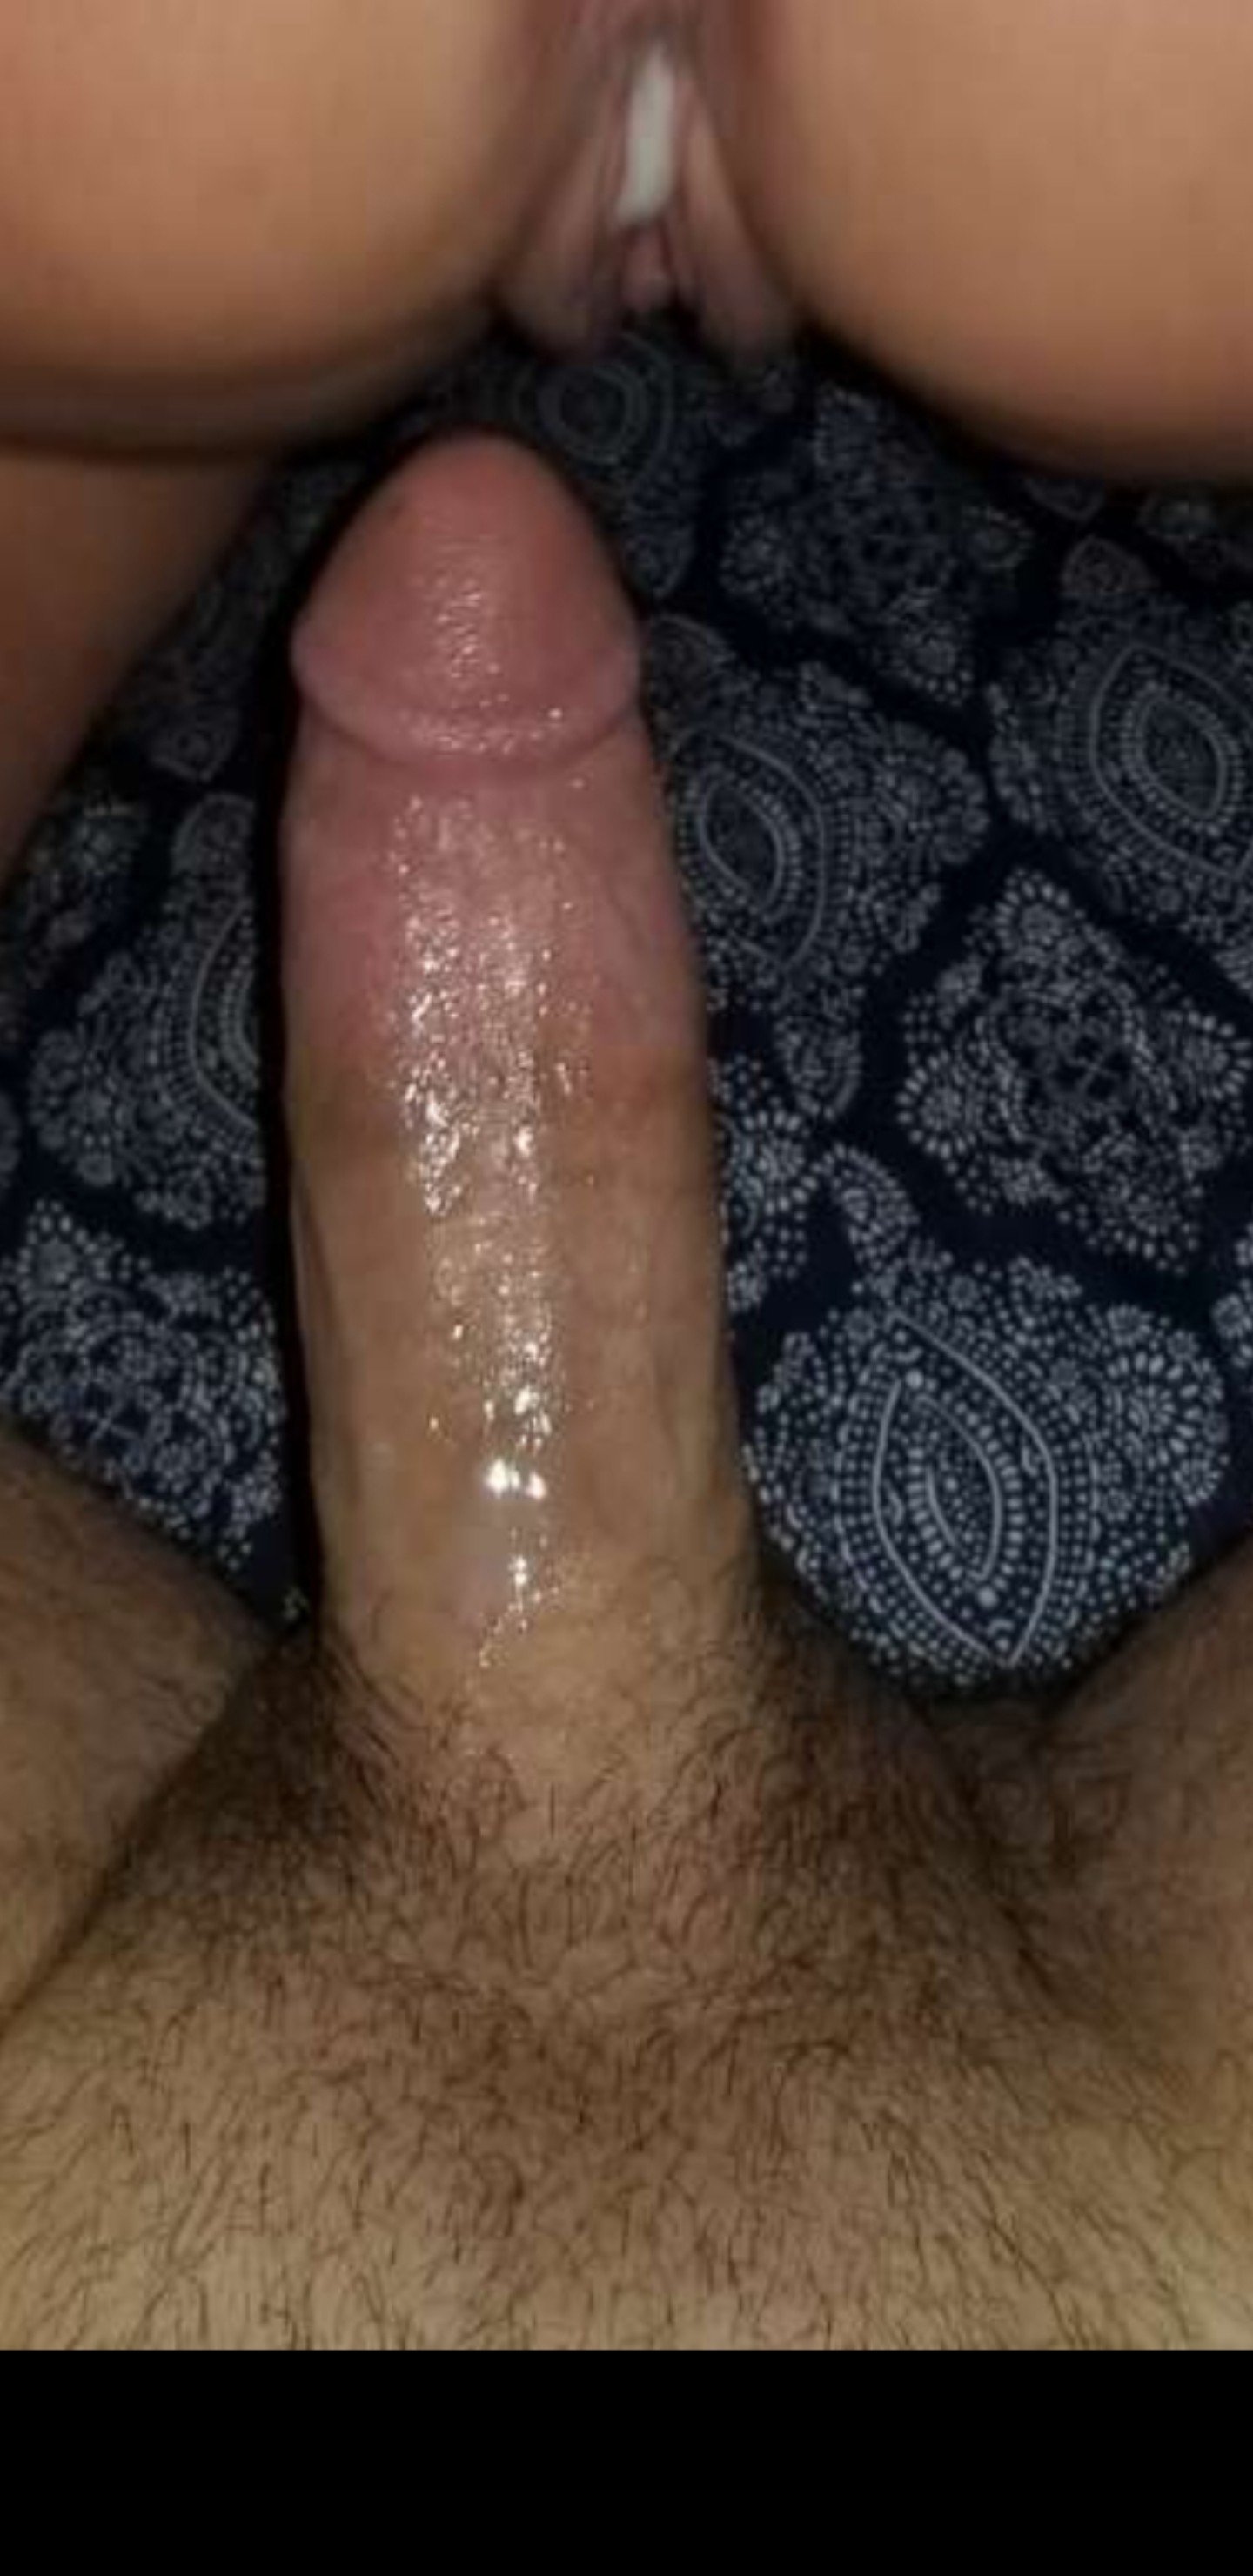 Photo by Sluttycumlover with the username @Sluttycumlover,  November 25, 2020 at 3:14 AM. The post is about the topic Cum Sluts and the text says 'I I looveeee a big creamy load from daddy 😇'